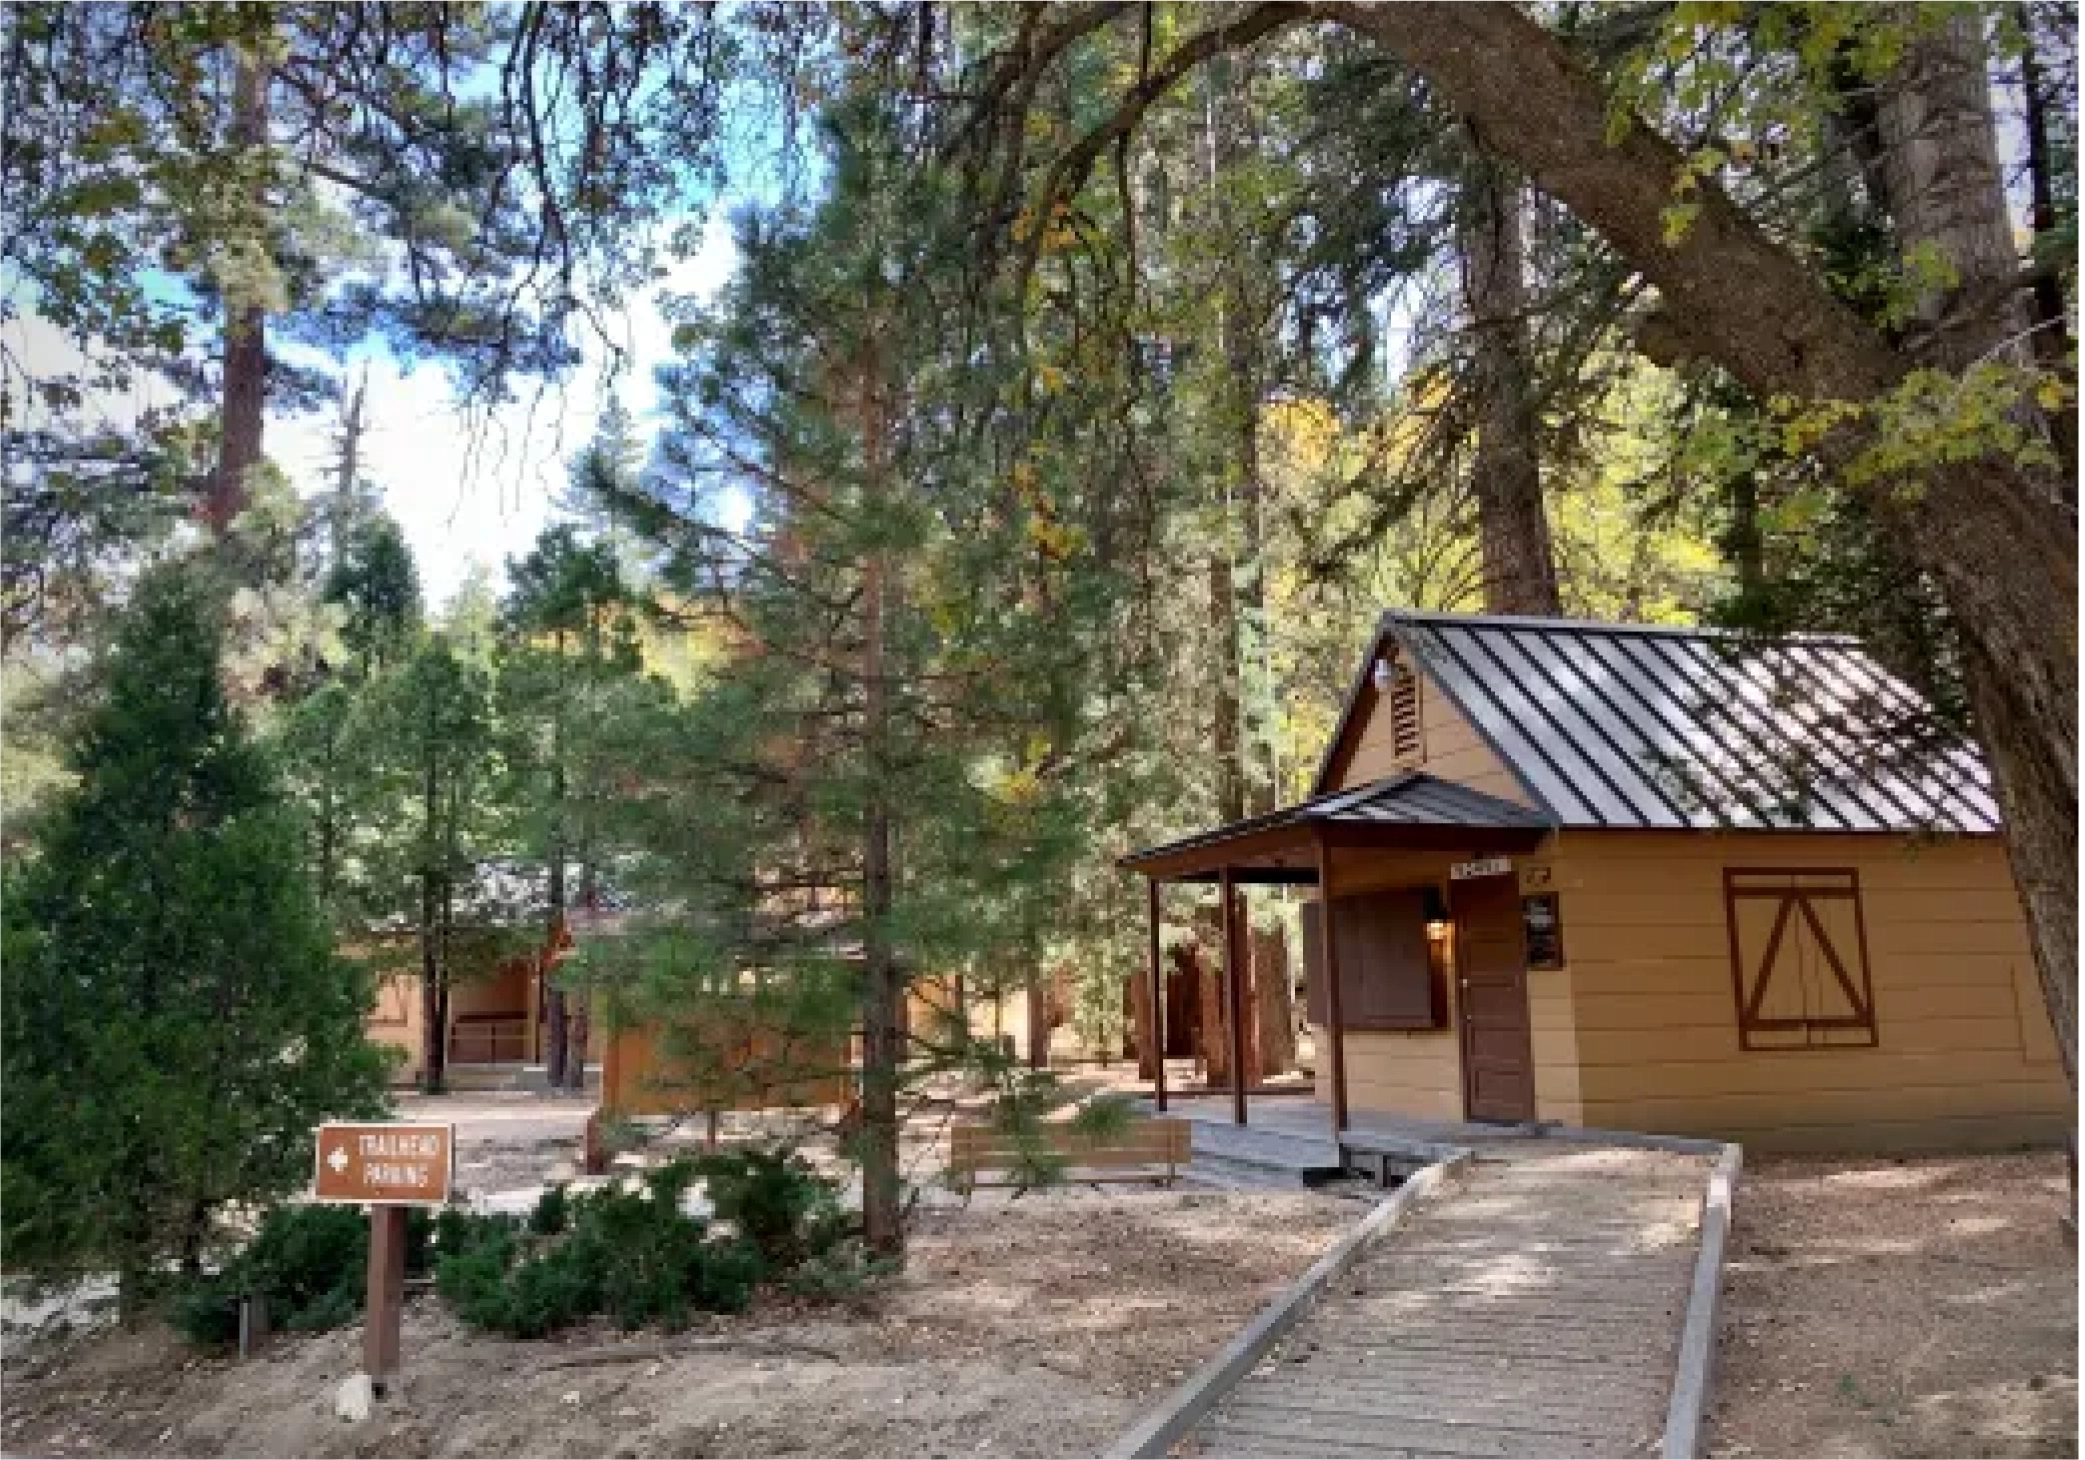 A picture of the front entrance to the Barton Flats Visitor Center